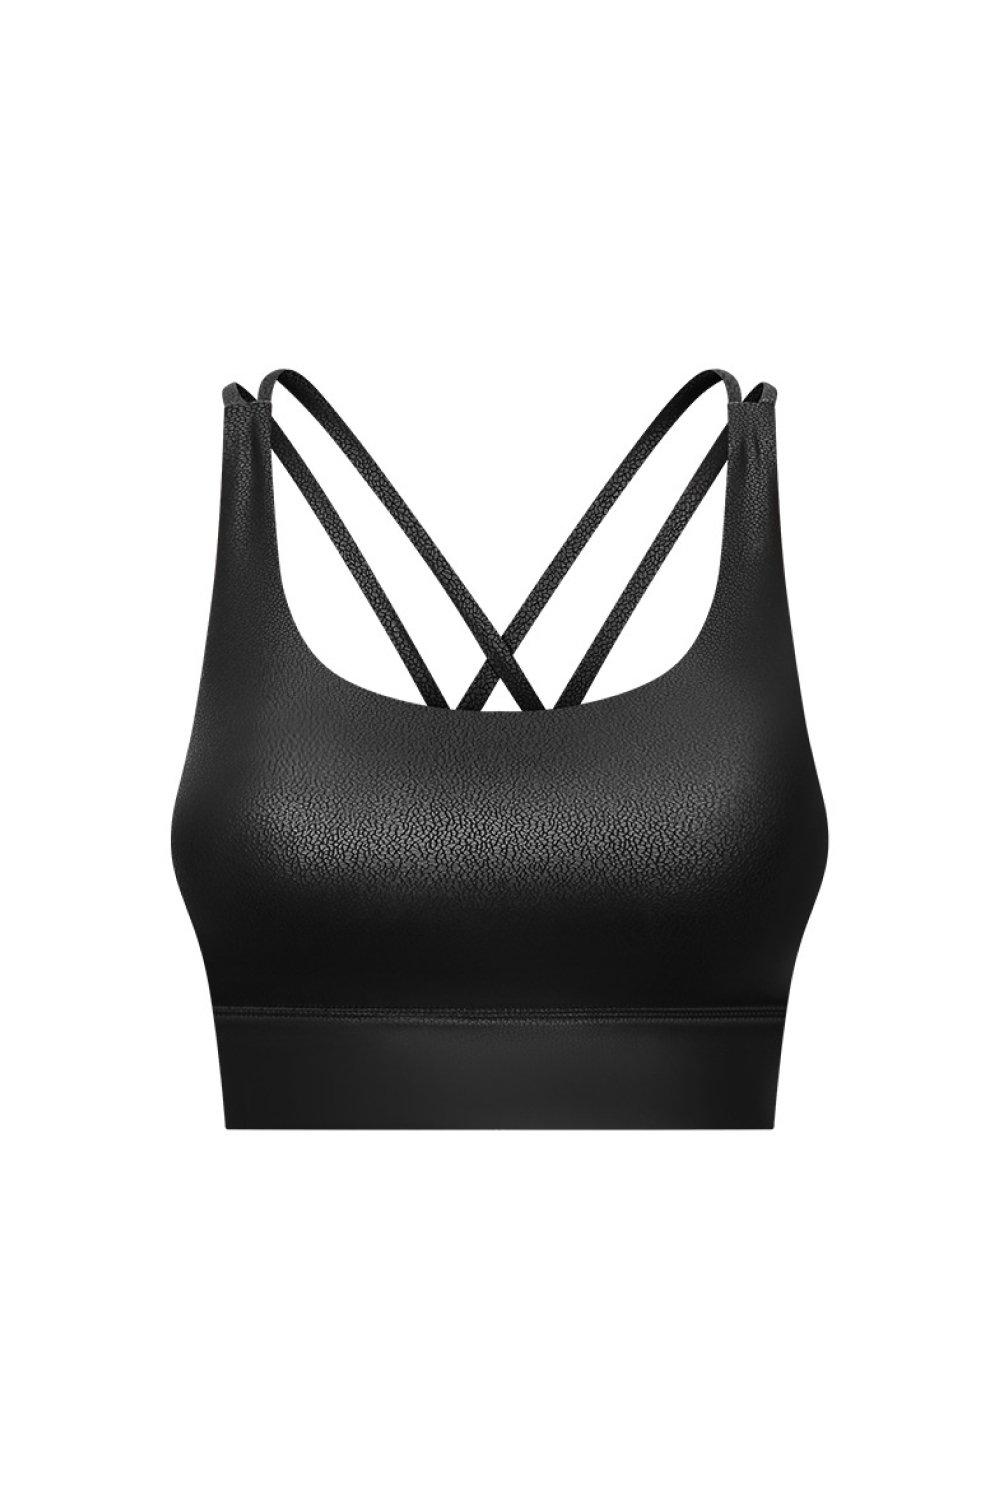 Crisscross Strapy Back Underwear-ACTIVE TOPS (TRENDSI NEED SIZE CHART)-[Adult]-[Female]-Black-4-Blue Zone Planet